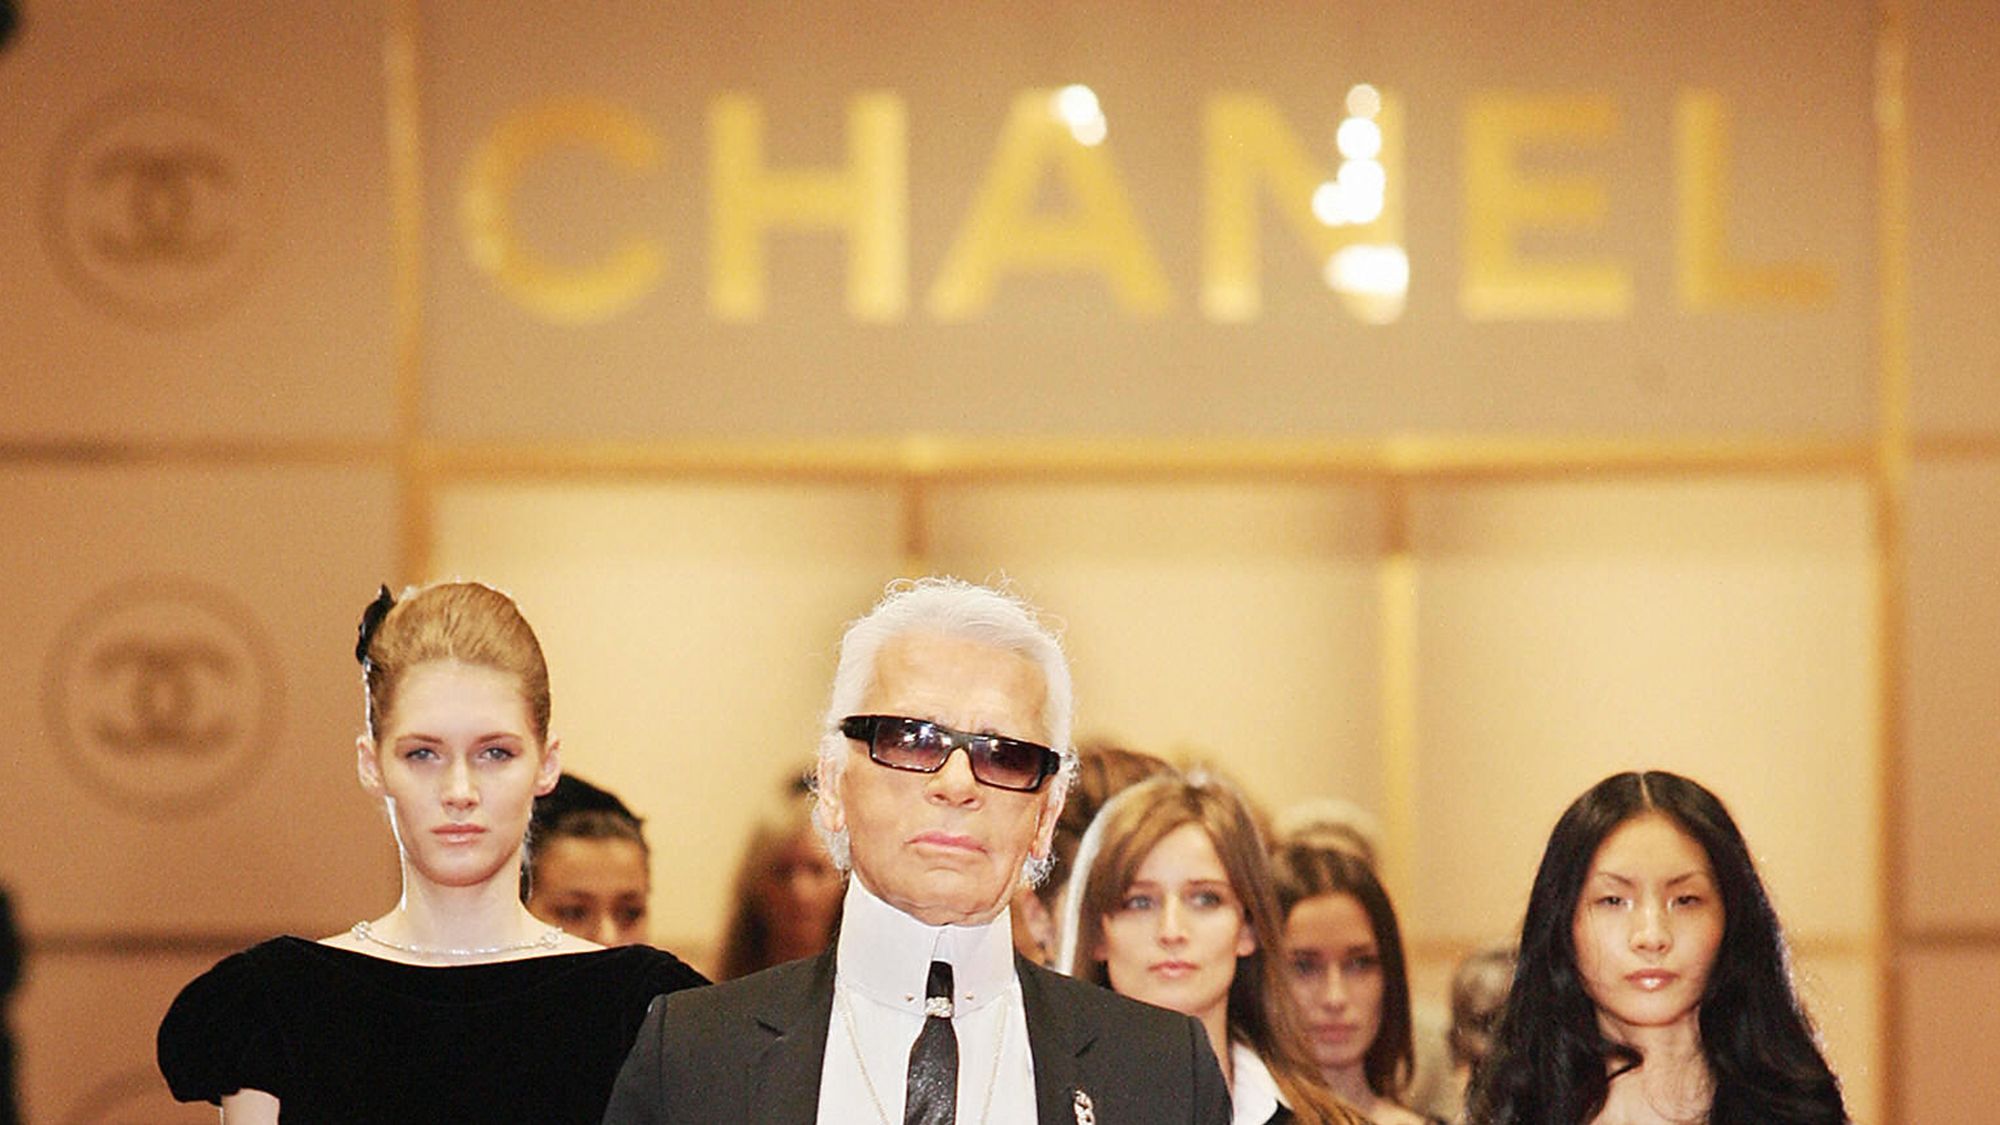 Karl Lagerfeld Quotes: The Most Famous Quotes From The Chanel Designer